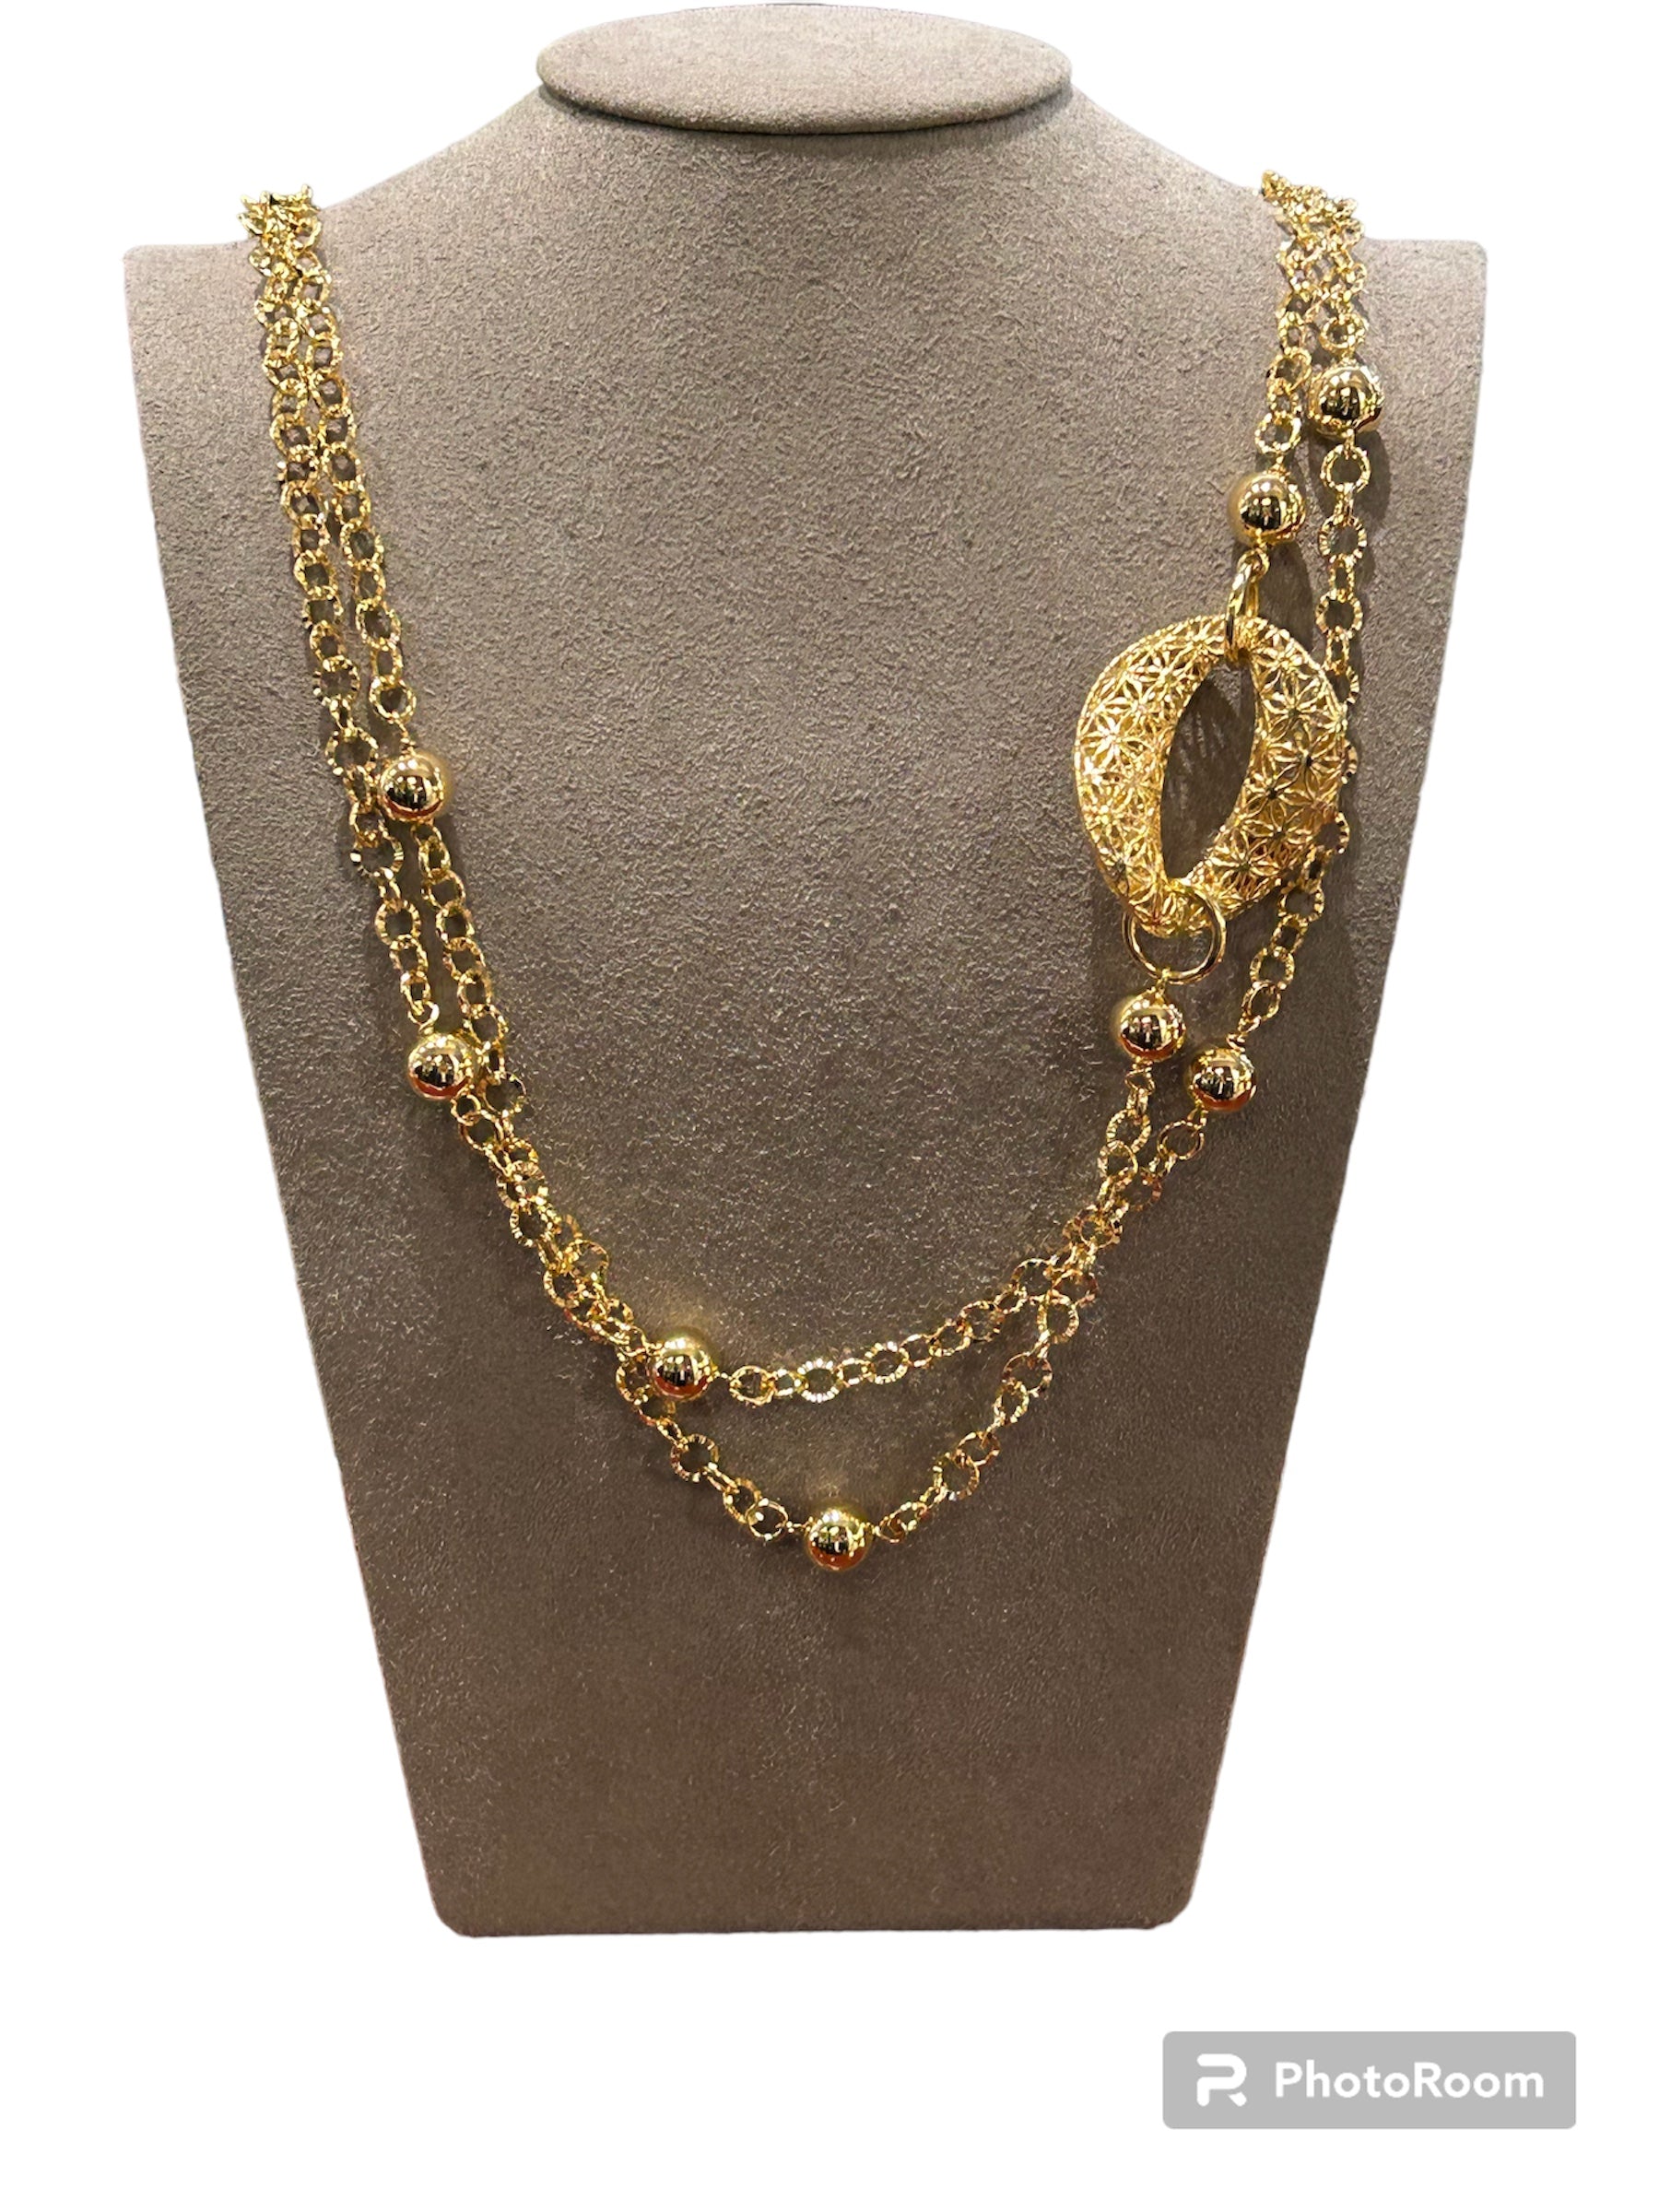 Lace-type necklace with fancy links in gilded bronze - SOL CL 003